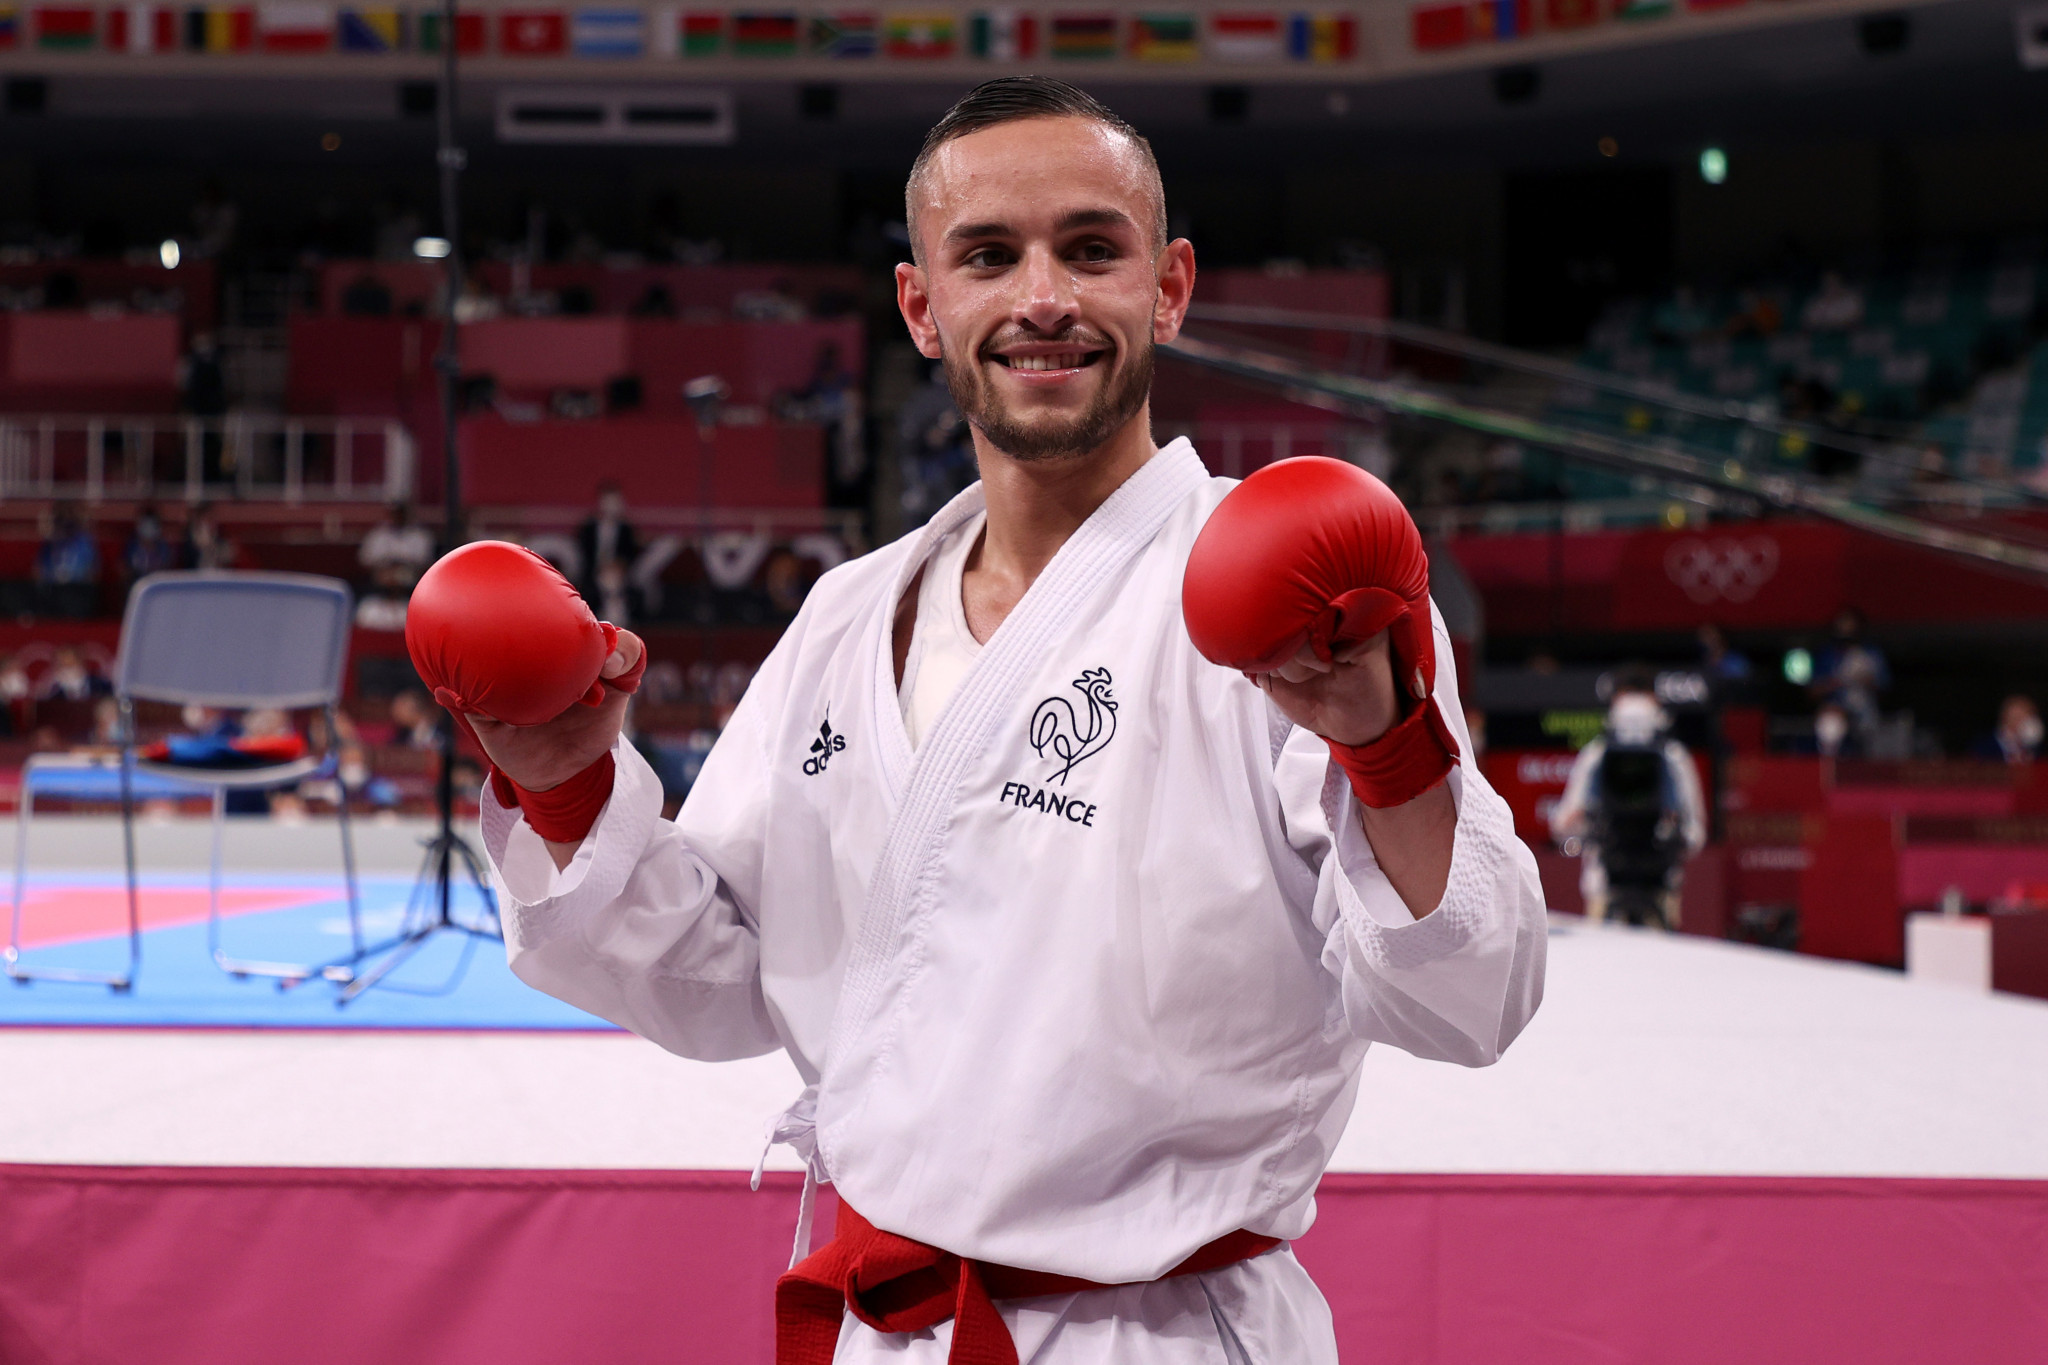 Steven Dacosta of France has also put forward his name for the Karate World Championships in Budapest ©Getty Images